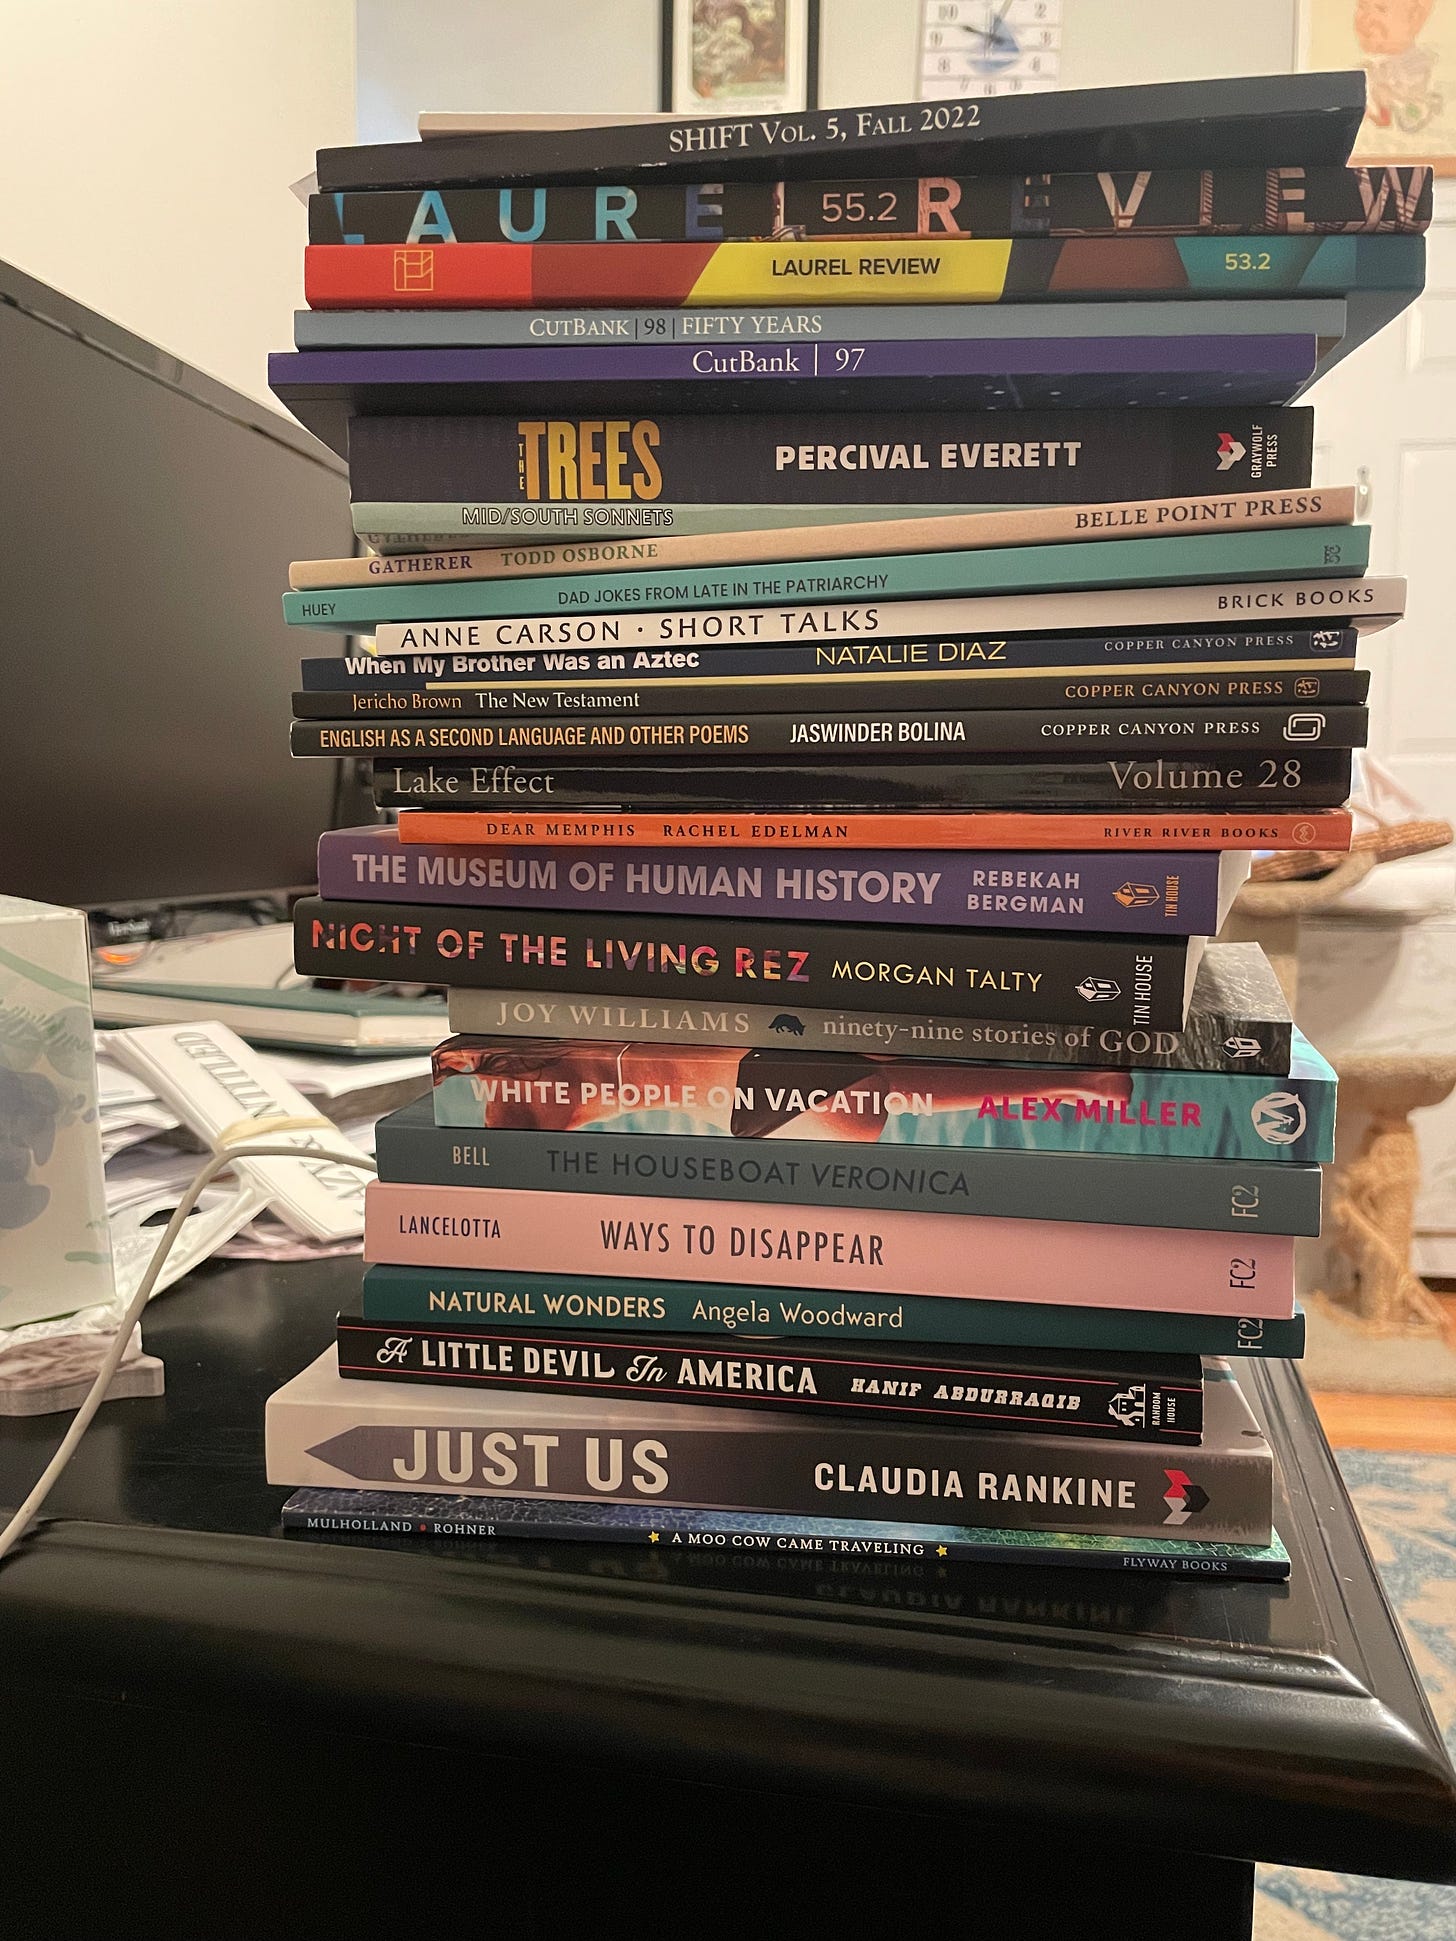 a stack of books, too towering to name them all, sitting on a desk with a cat tower visible in the background